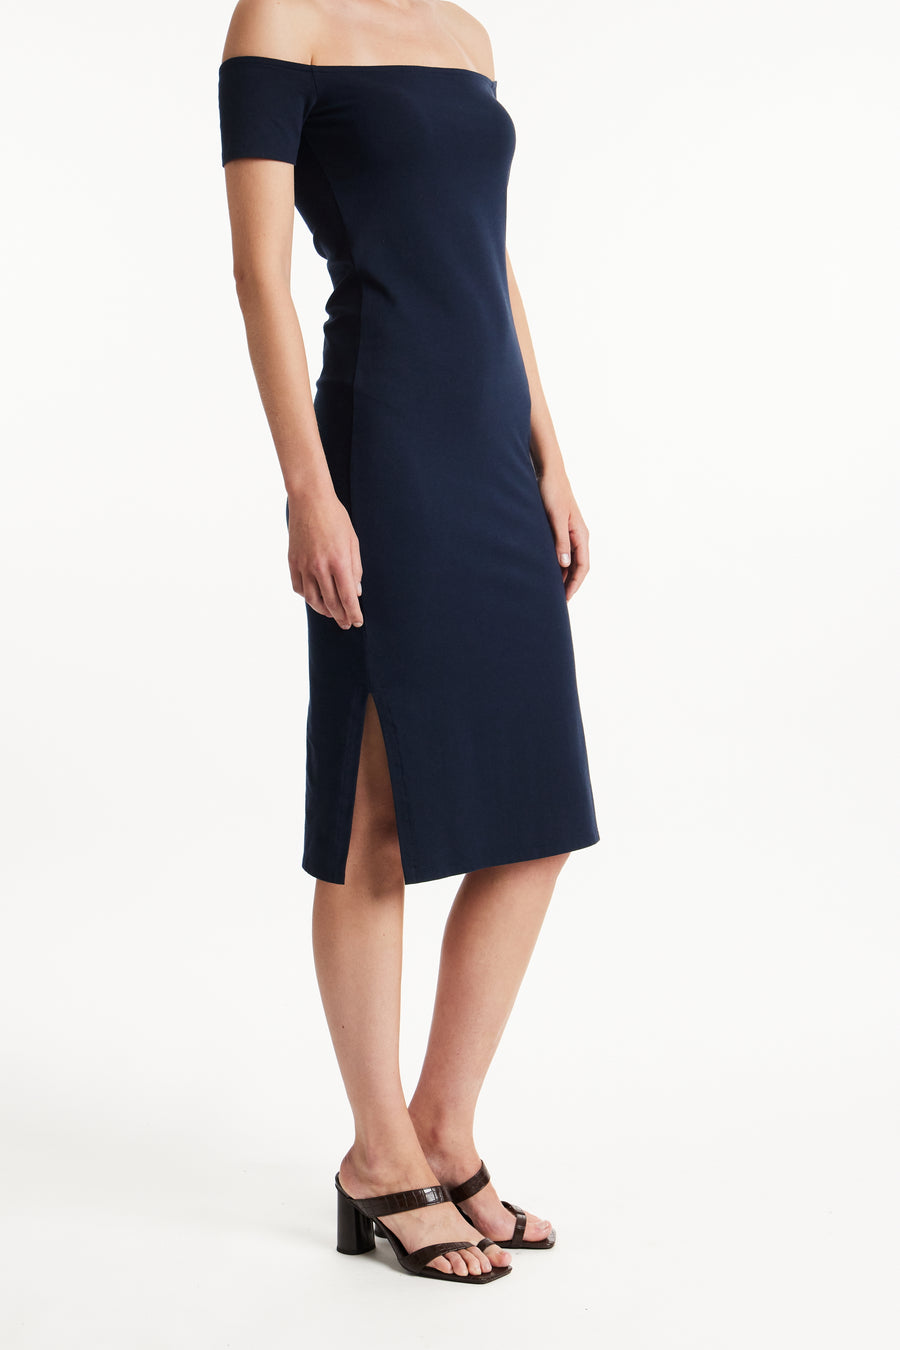 People Tree Fair Trade, Ethical & Sustainable Emer Dress in Navy 95% organic certified cotton, 5% elastane